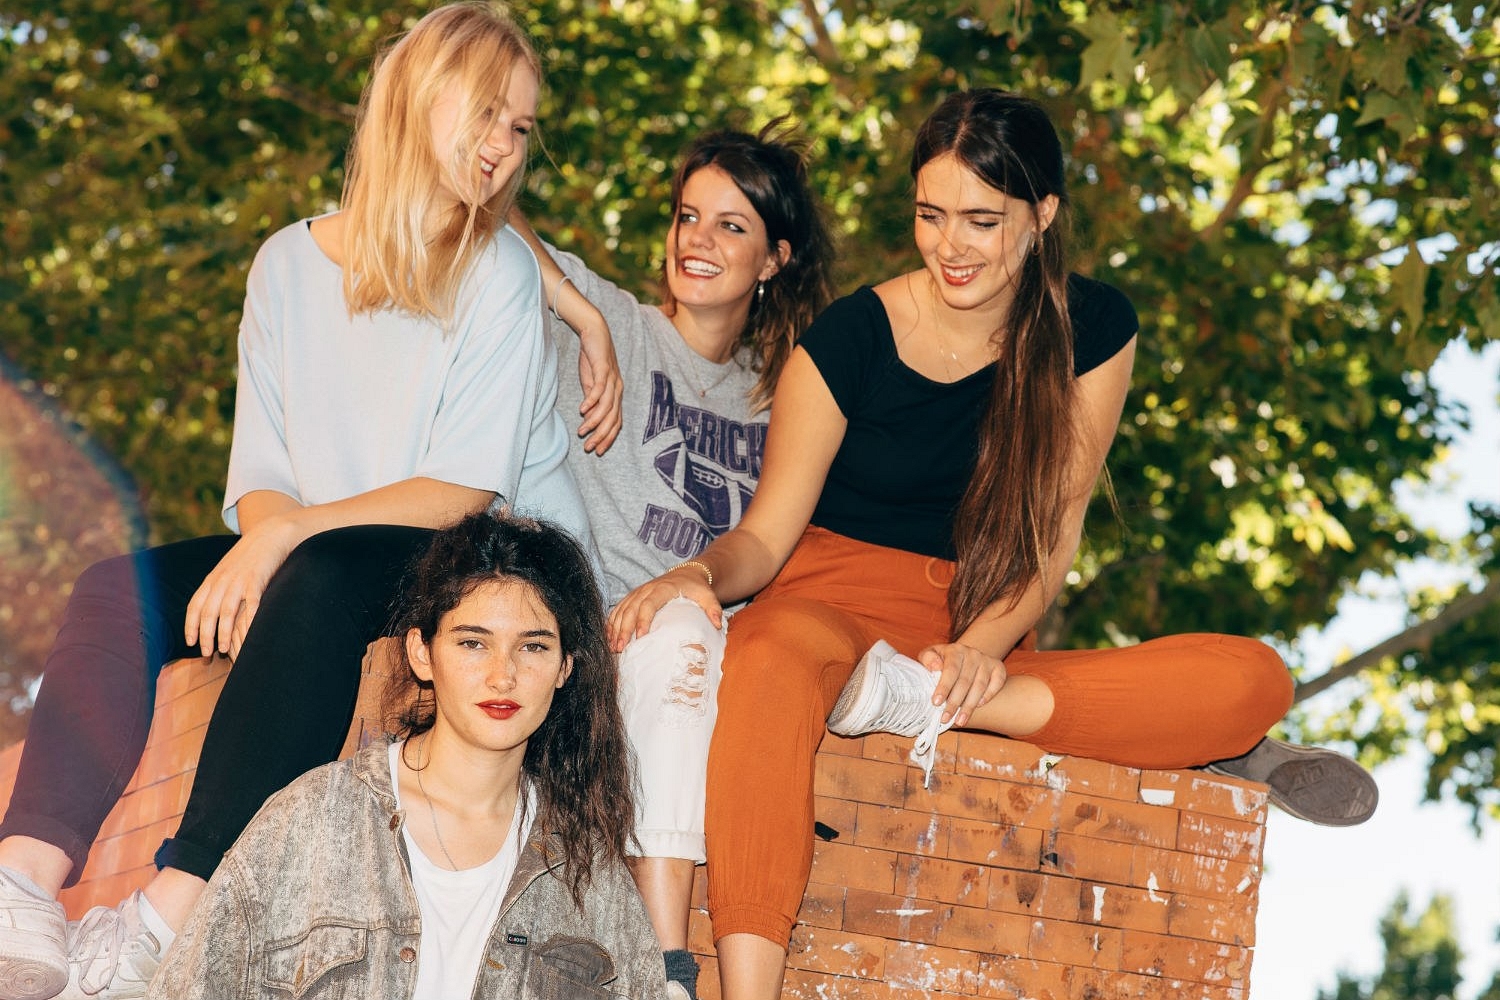 Hinds’ excellent debut album is streaming in full